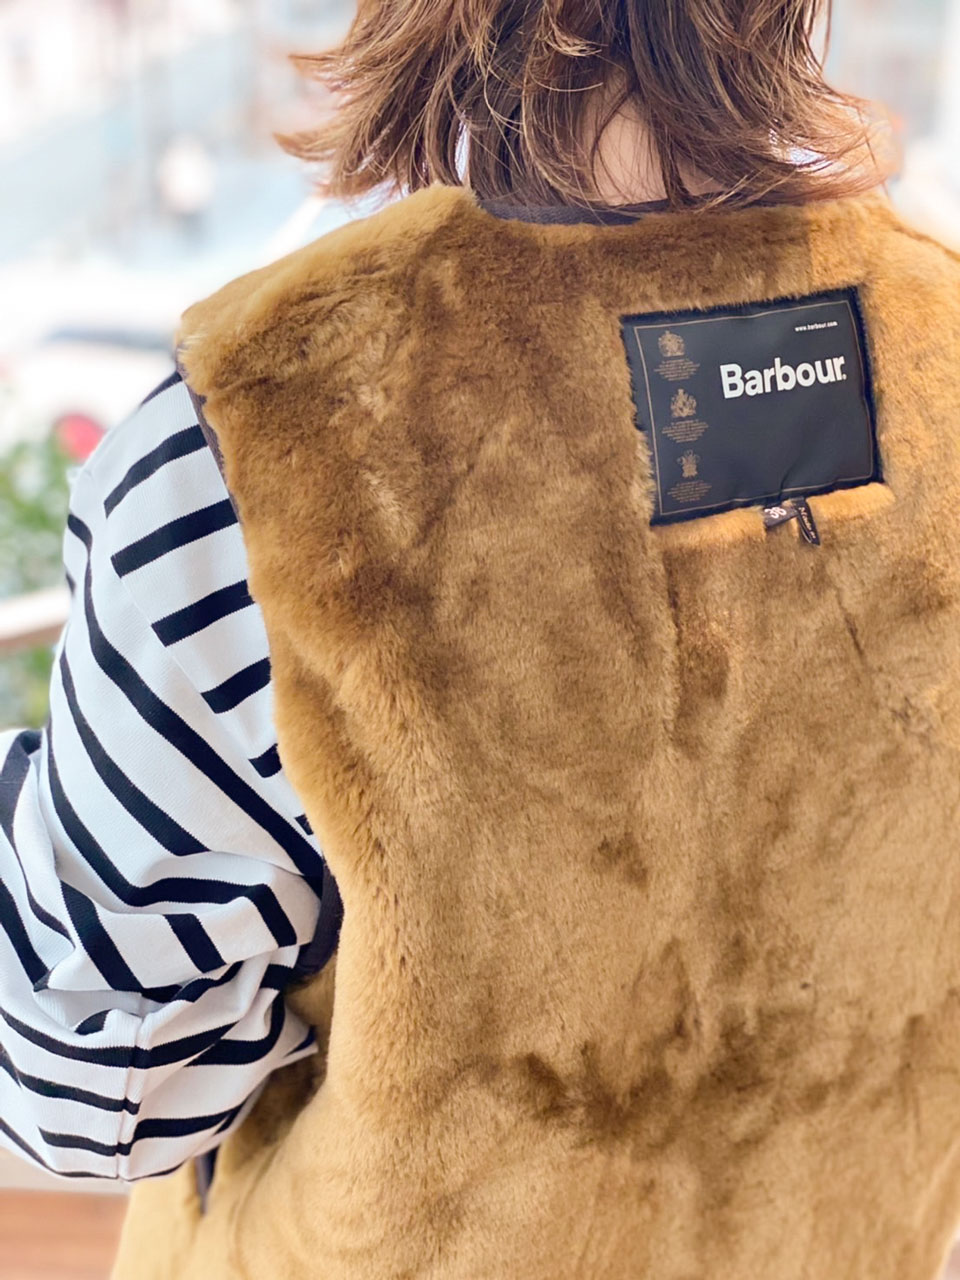 Barbour 21AWFUR LINER | RONNIE SCOTT'S Official Web Site